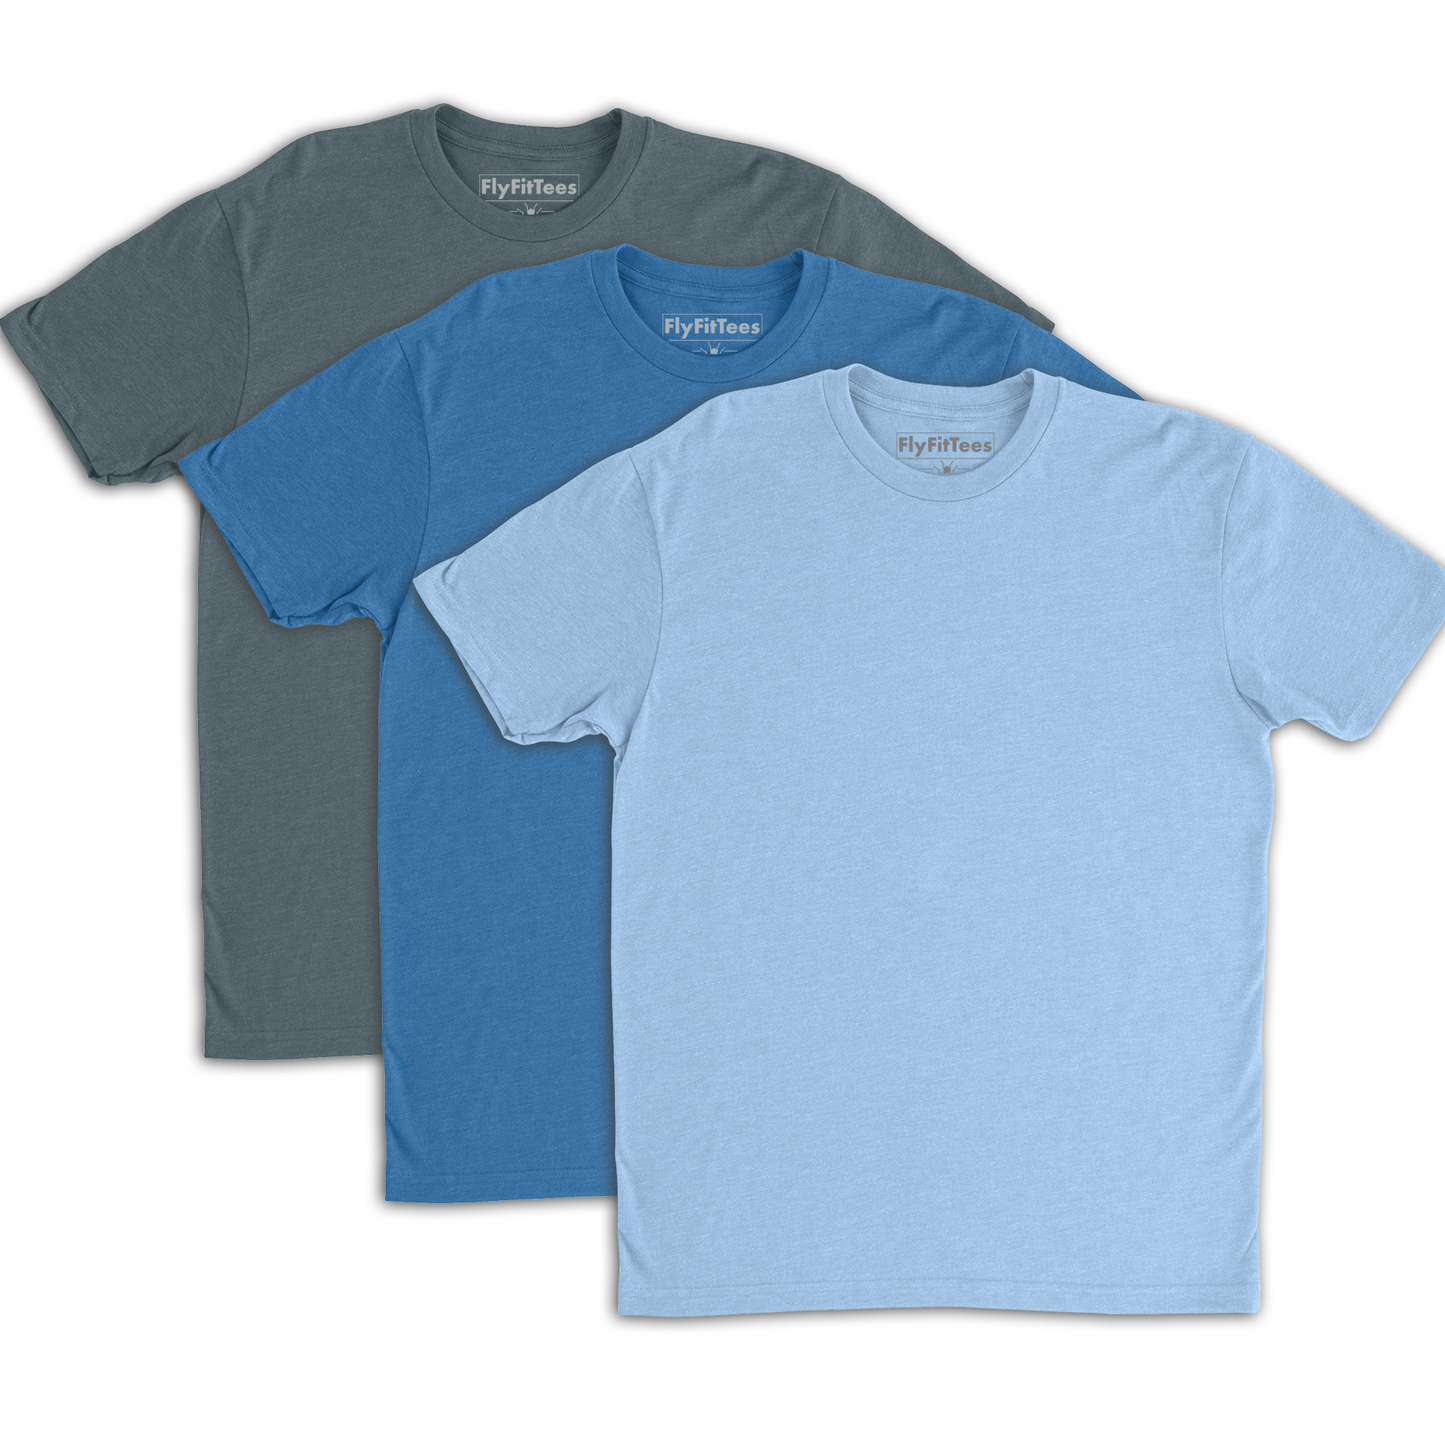 SoFly Original Perfect Fit Tee - 3 Pack - Case of the blues (Final Chance - only few left)